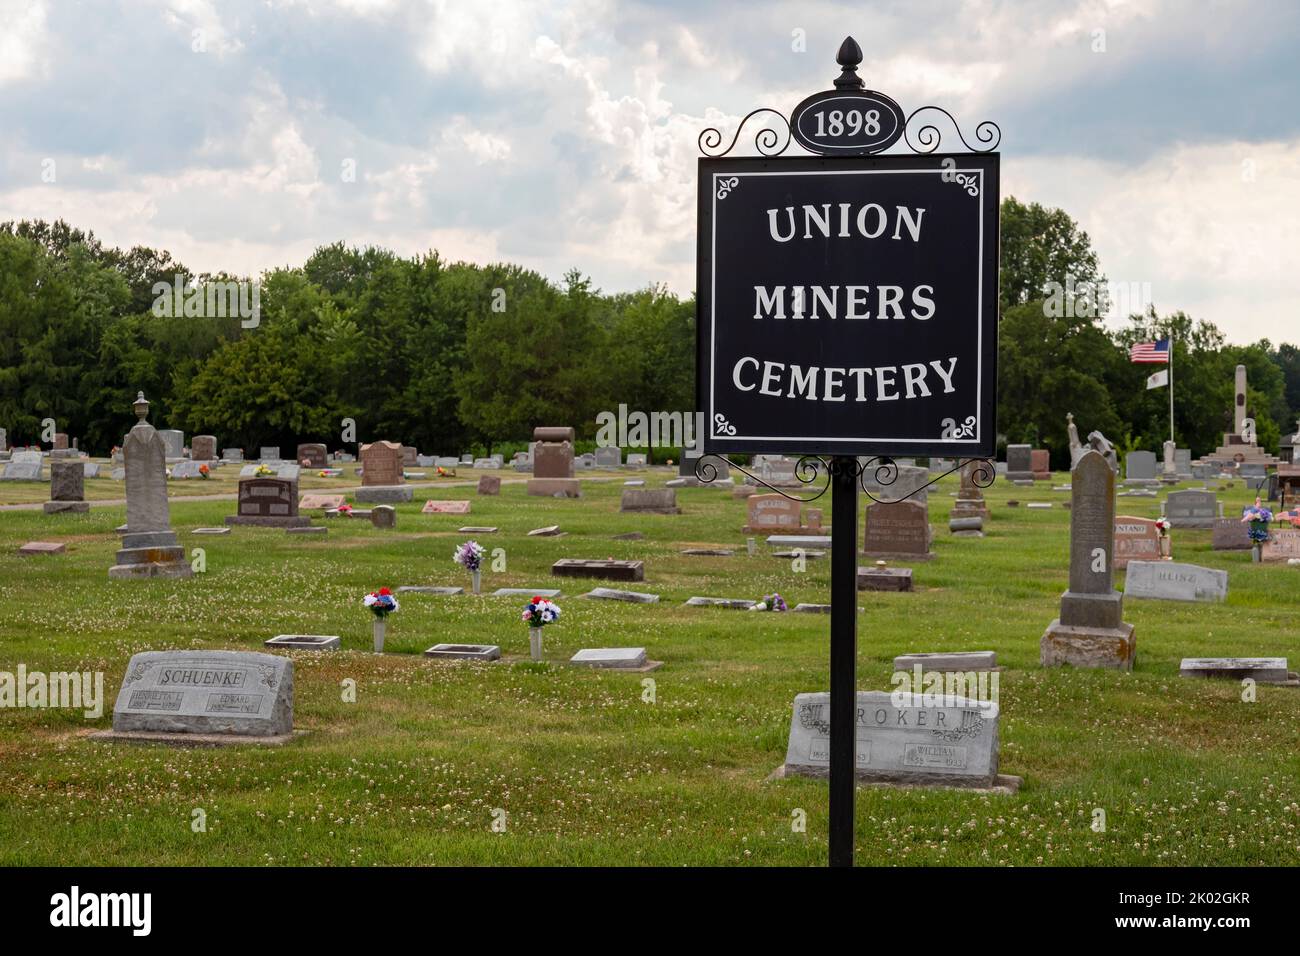 Mt. Olive, Illinois - The Union Miners Cemetery. The cemetery includes the grave of legendary labor leader Mary Harris 'Mother' Jones. Stock Photo